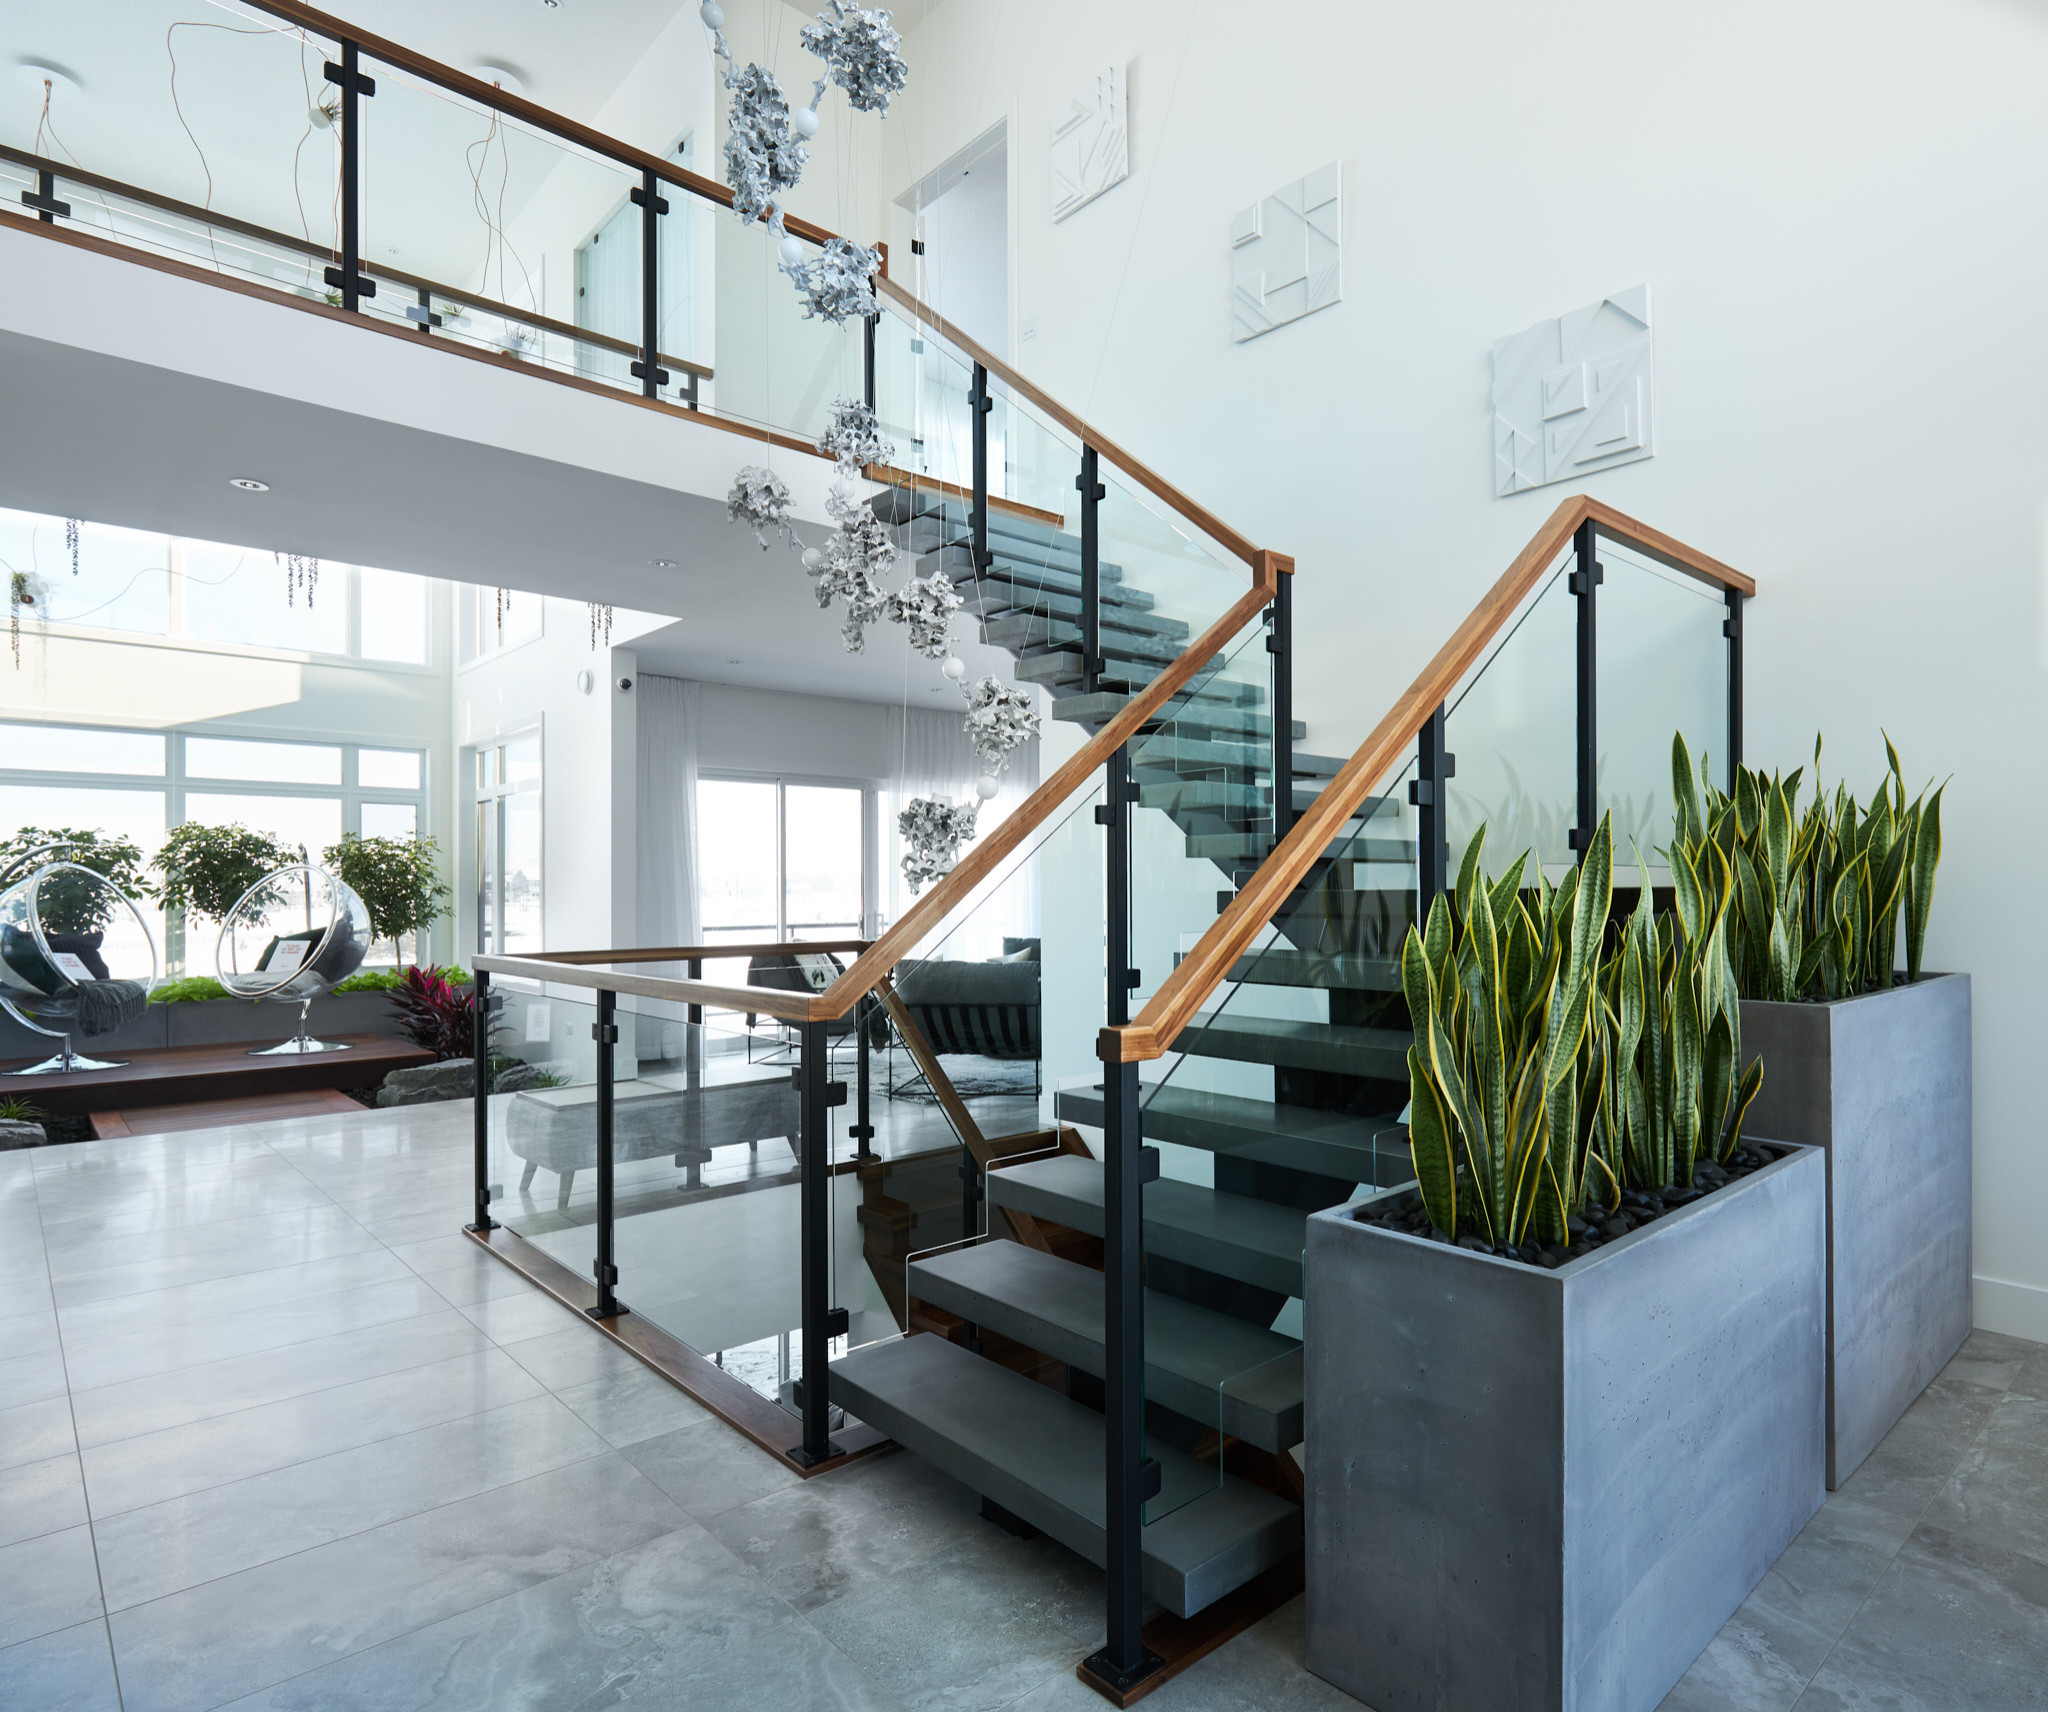 https://st.hzcdn.com/simgs/pictures/staircases/steel-and-concrete-mono-stringer-with-clamped-glass-railing-system-specialized-stair-and-rail-img~385173120d13d33e_14-5513-1-4b38eb8.jpg